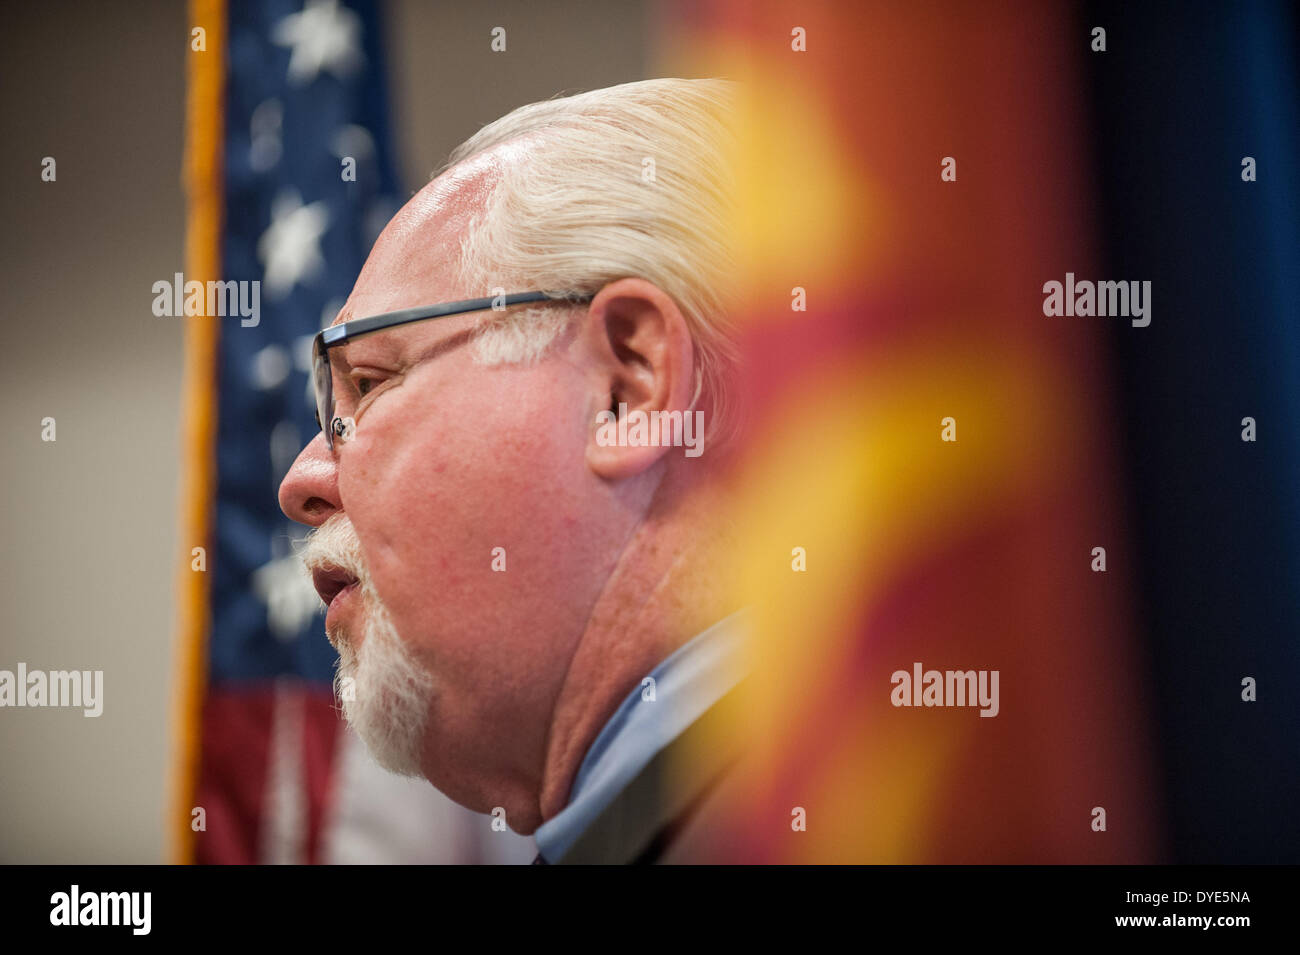 Tucson, Arizona, USA. 15th Apr, 2014. Rep. RON BARBER (D-Ariz.) today held a meeting with U.S. Air Force Gen. G. Hostage over the future of the A-10 and its home base Davis-Monthan Air Force Base in Tucson, Ariz. Barber said during a press conference following the closed meeting that Hostage called DMAFB vital, and said he would work to keep the base open even after the A-10 is retired. Barber is also working with other members to keep the A-10 and F-16 fighters flying even as the Pentagon moves closer to deploying the F-35. © Will Seberger/ZUMAPRESS.com/Alamy Live News Stock Photo